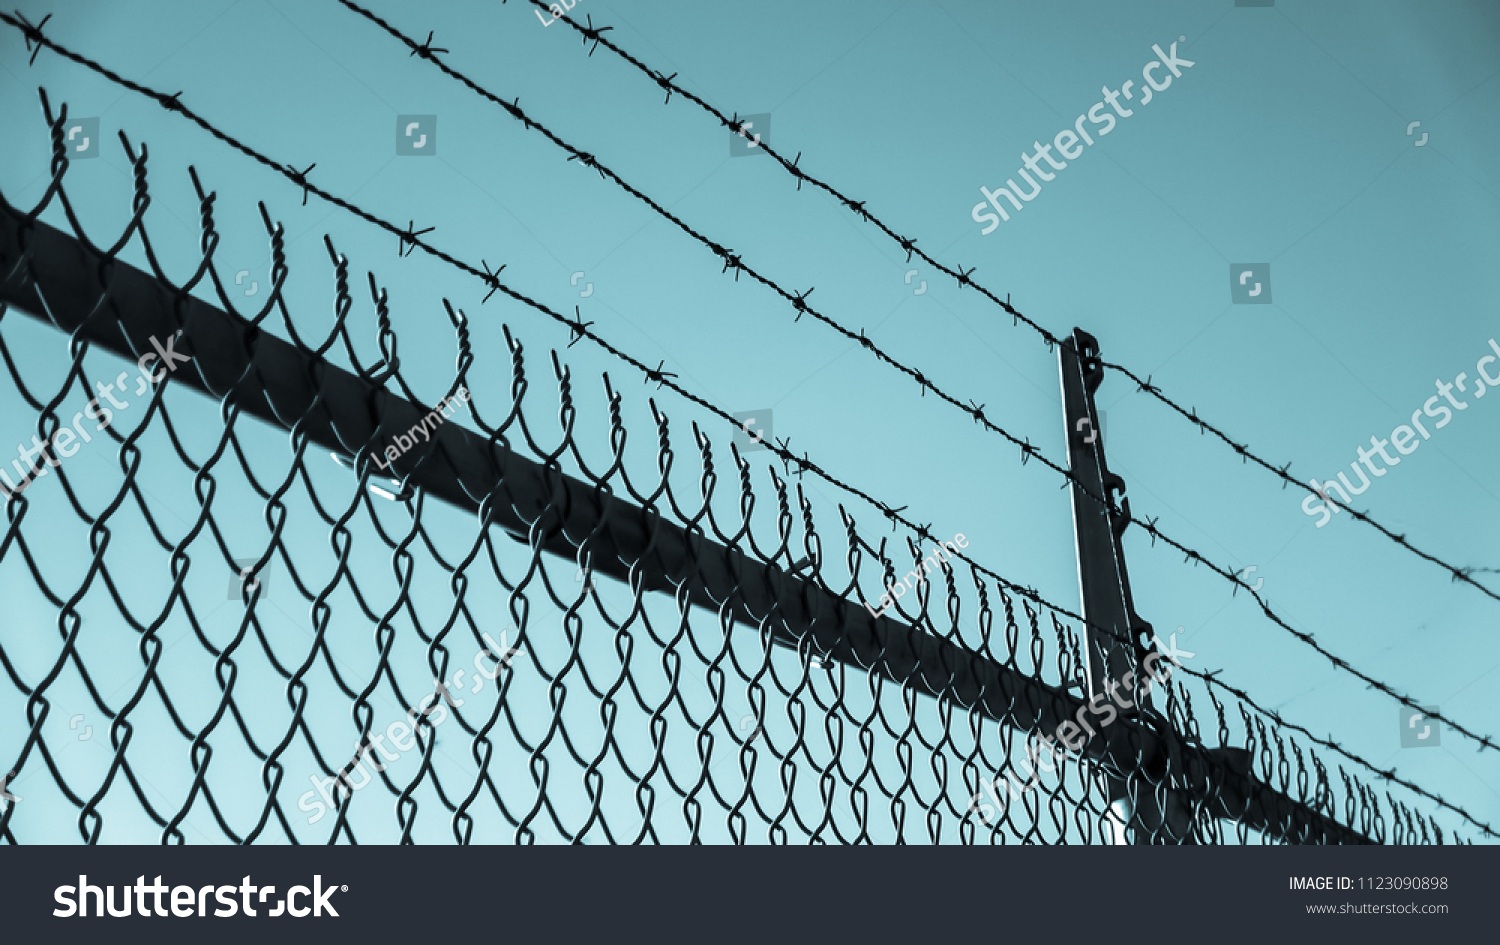 Barbed wires and steel wire mesh fence #1123090898